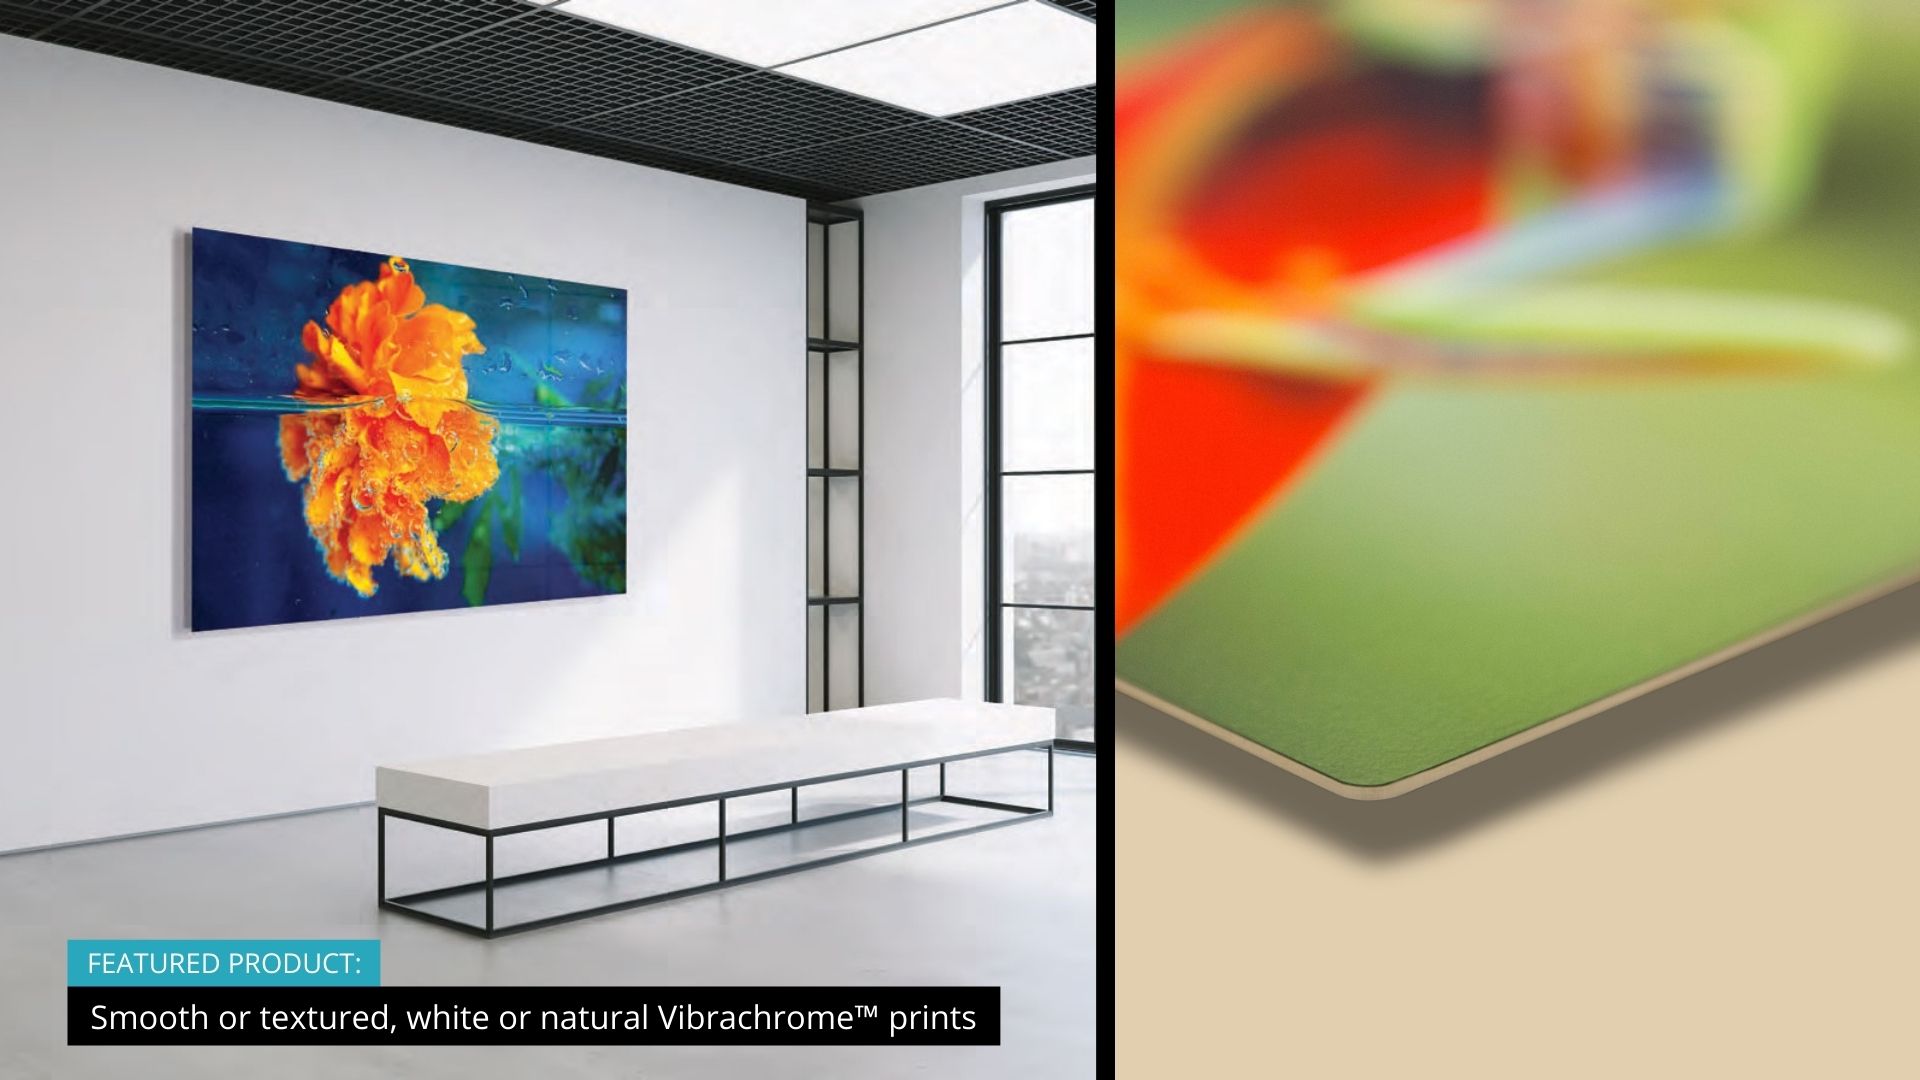 Photo of a white corporate office wall with a bright colorful vibrachrome photo print of a abstract blue yellow and green artwork